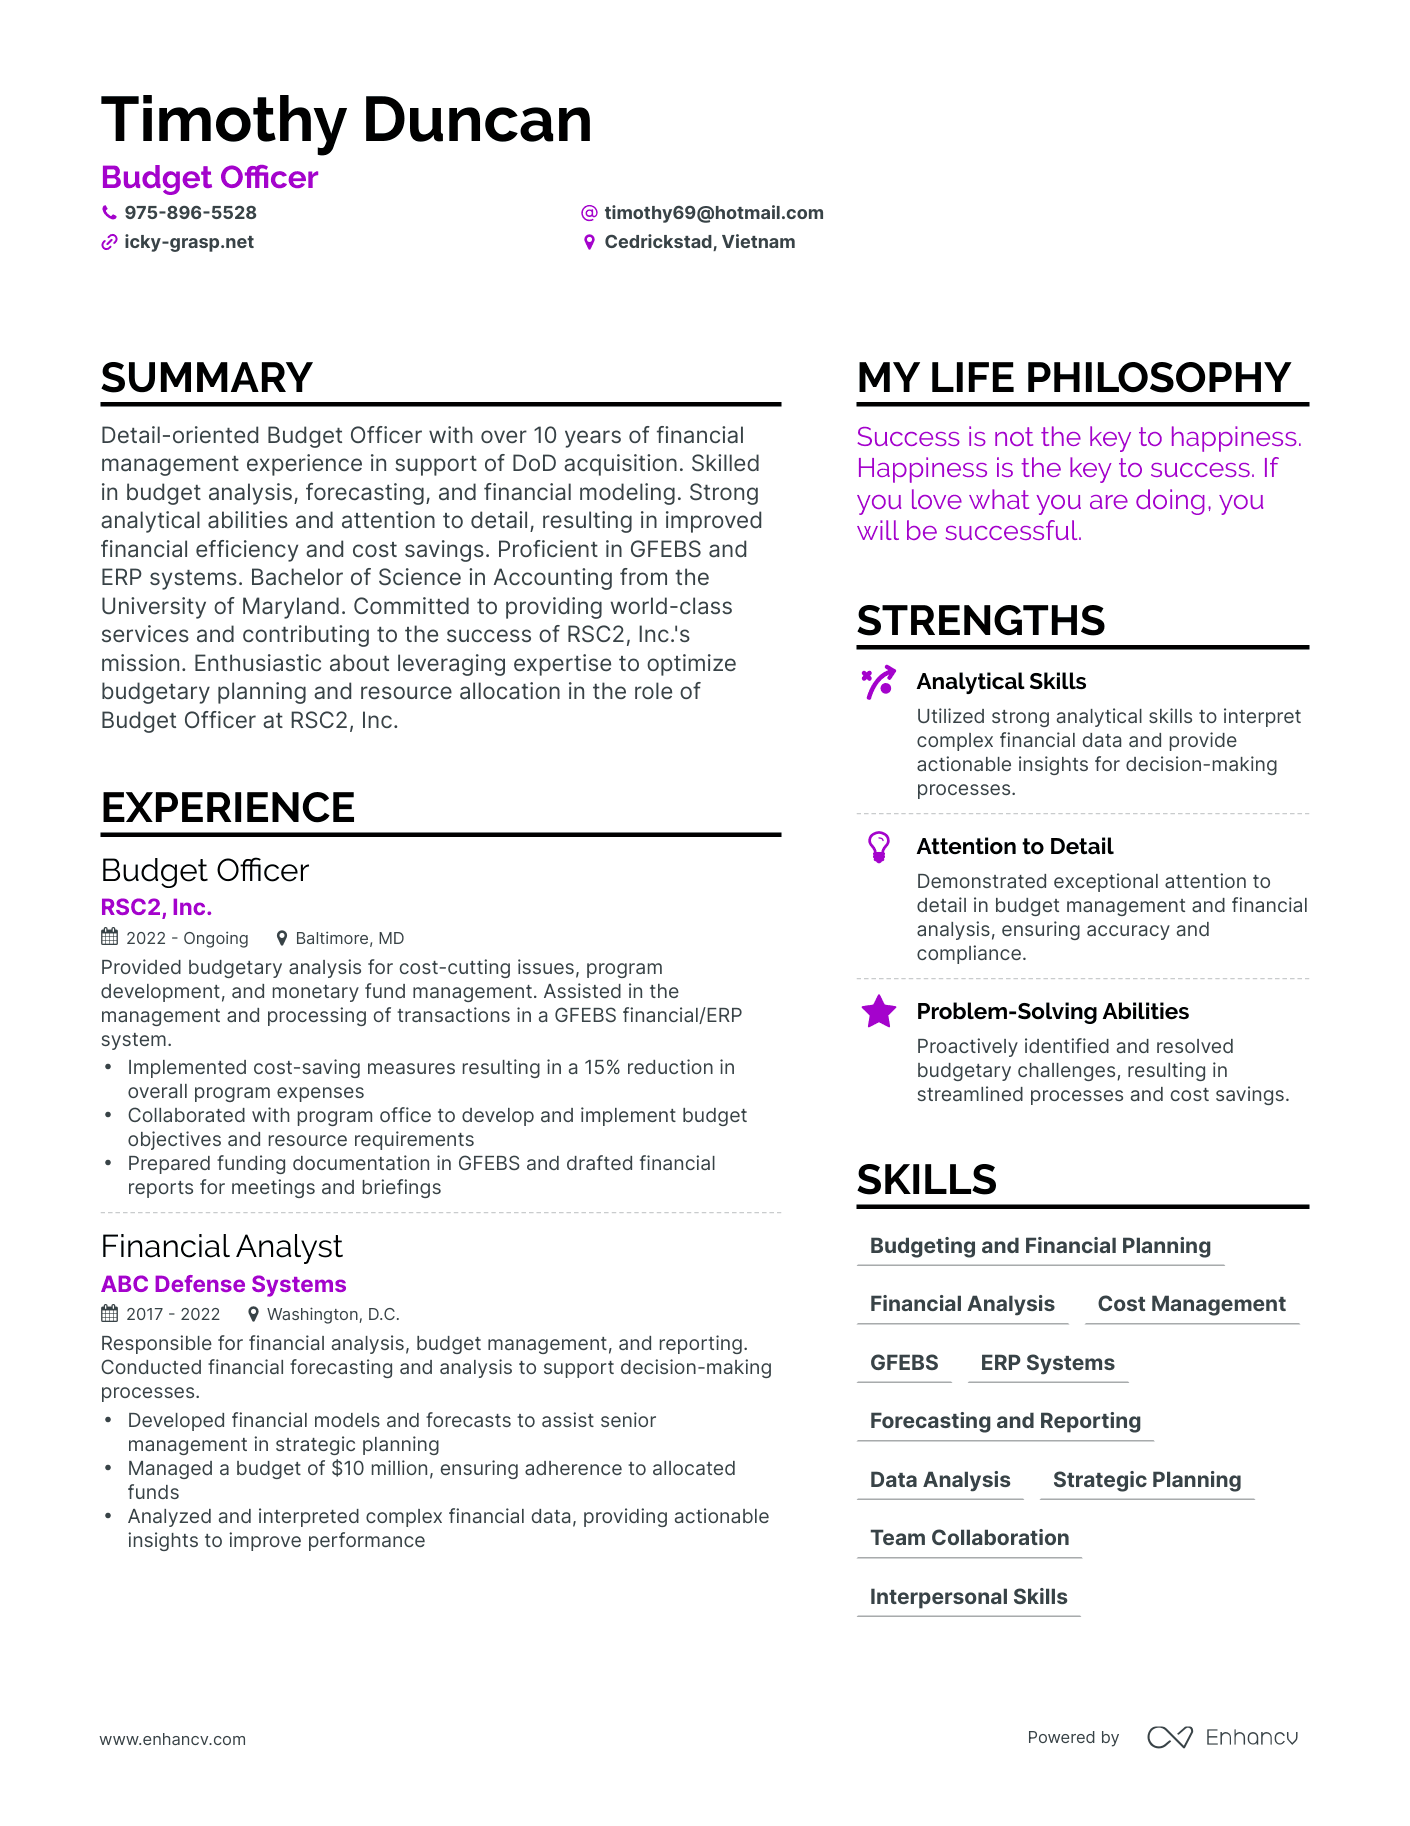 Budget Officer resume example